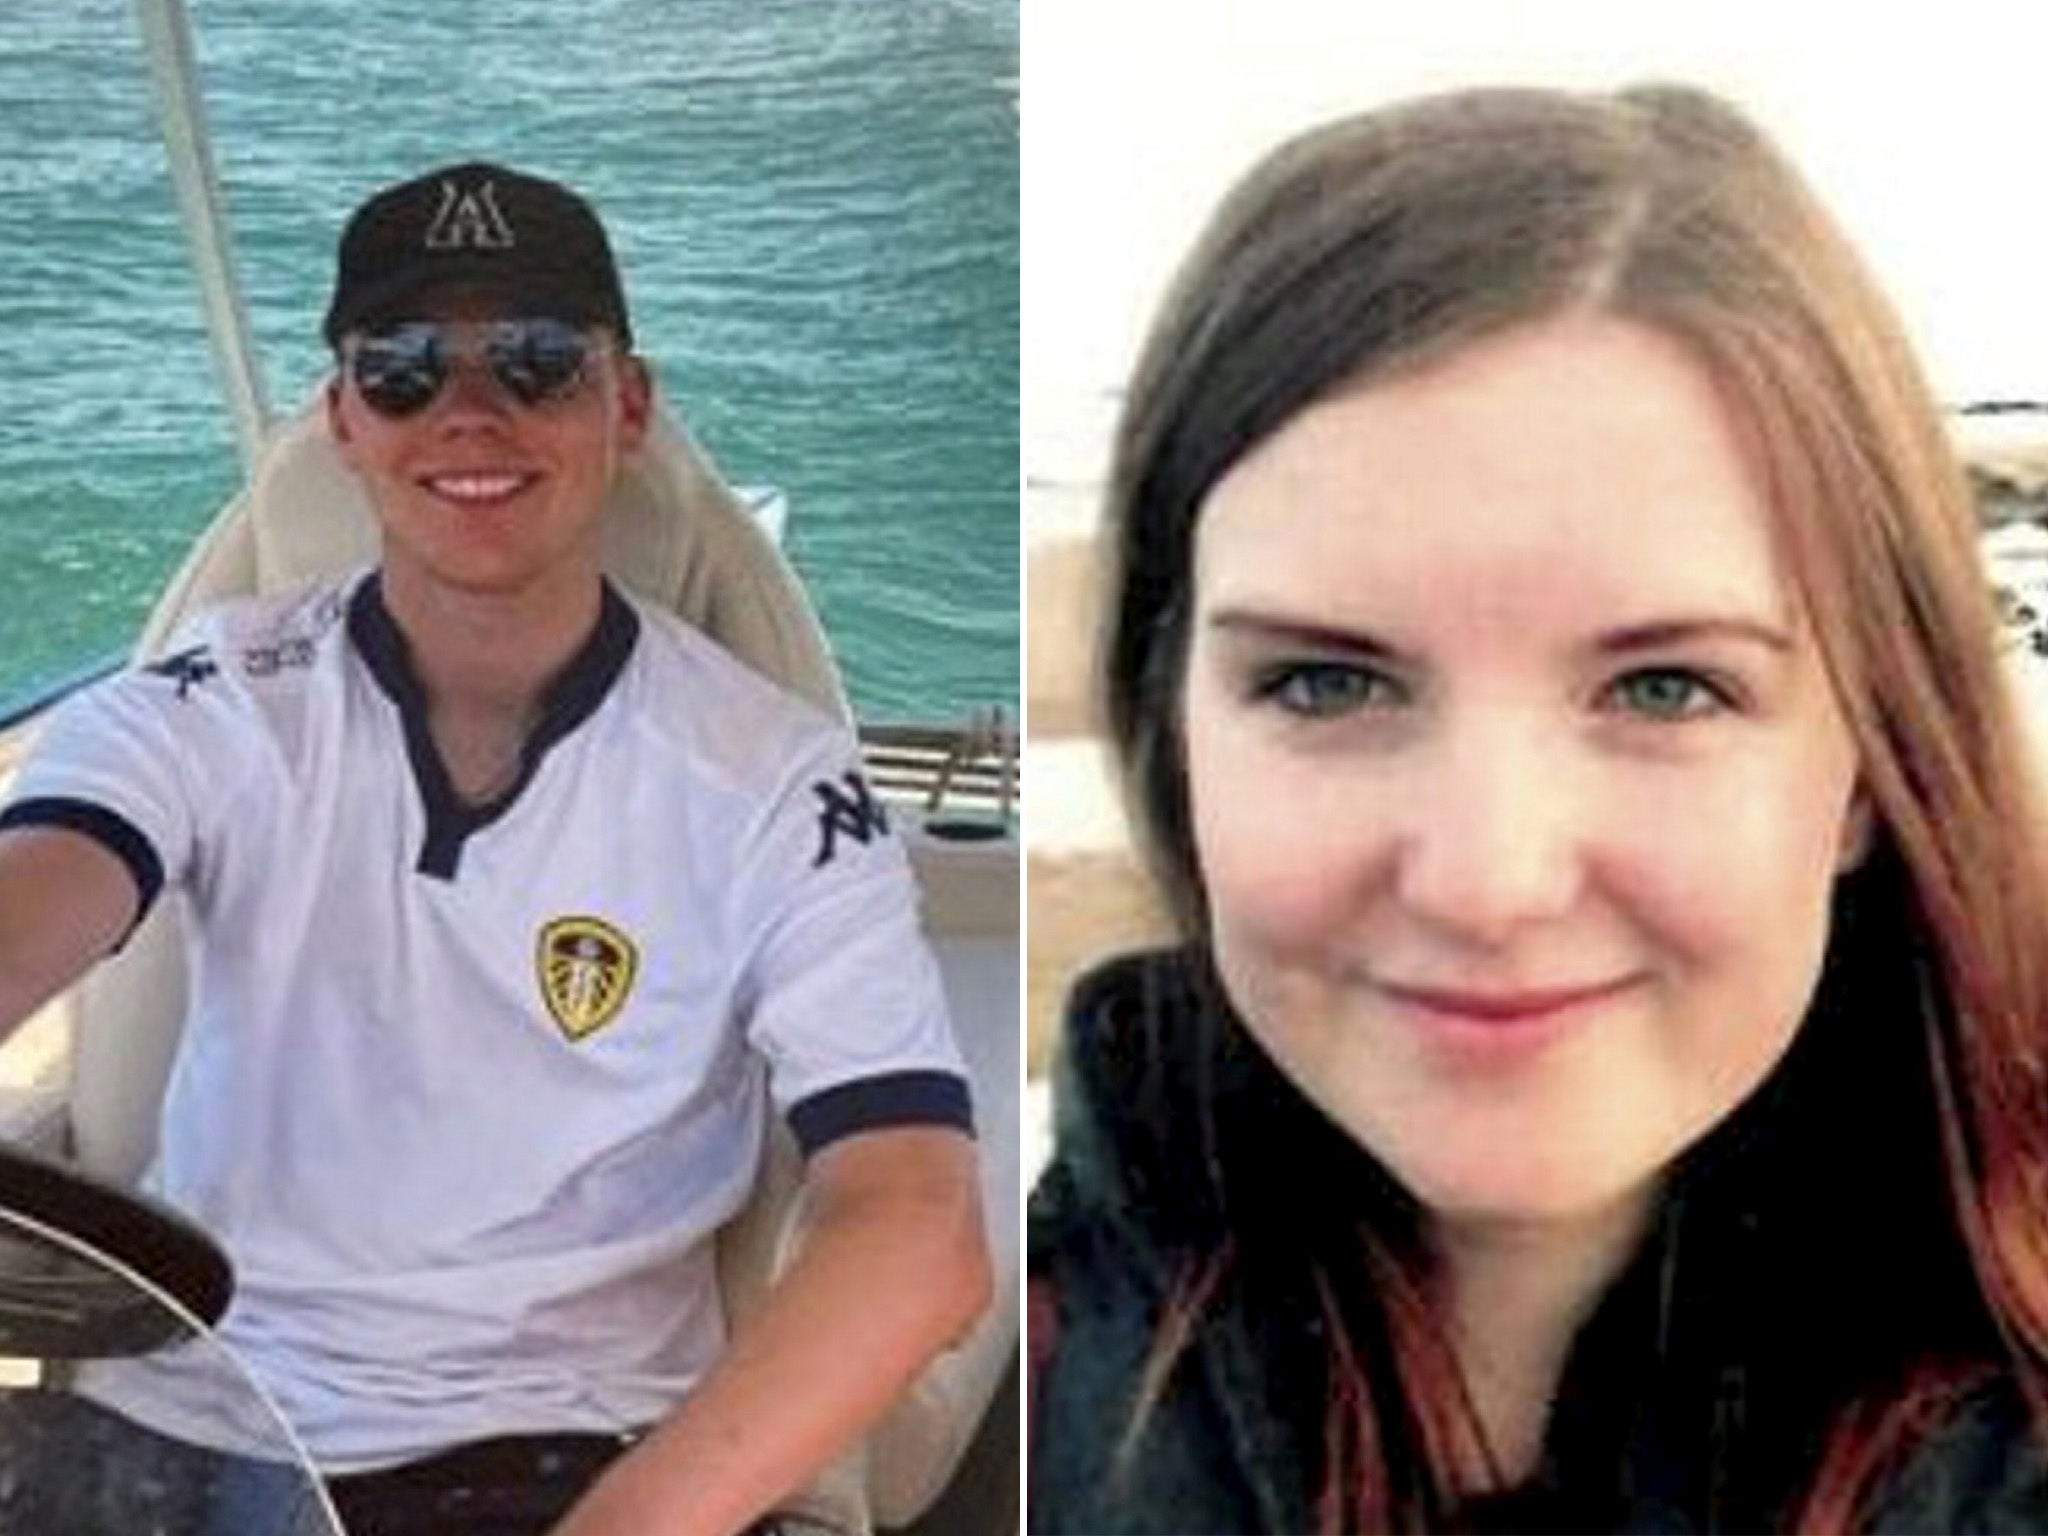 Oliver Knott and Maisie Ryan were both killed instantly